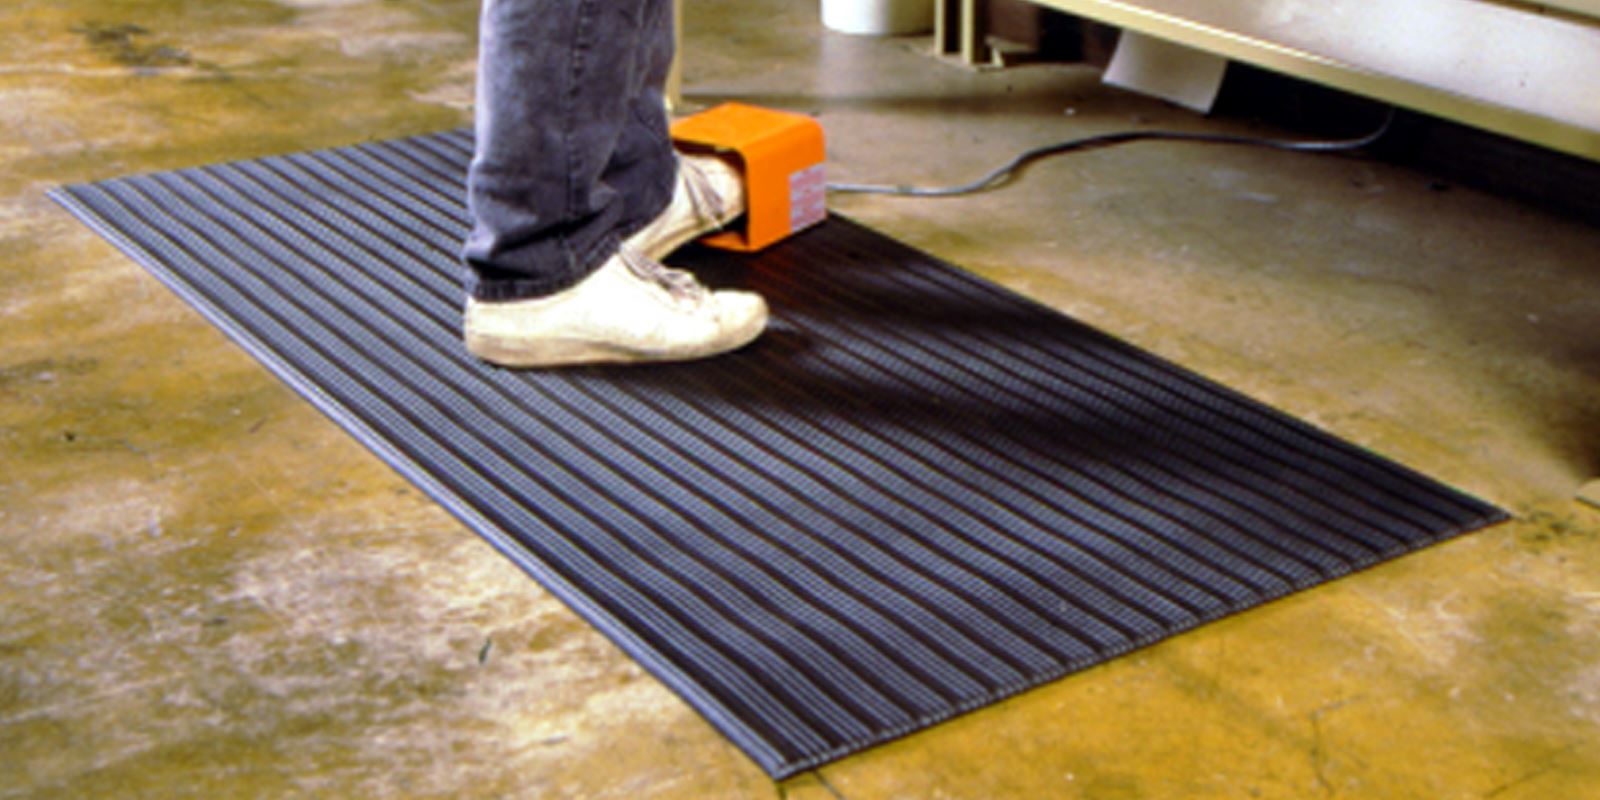 Durable Rubber Bubble Surface Fatigue Mat for Industrial/Factory Areas, 2'  x 3', Black